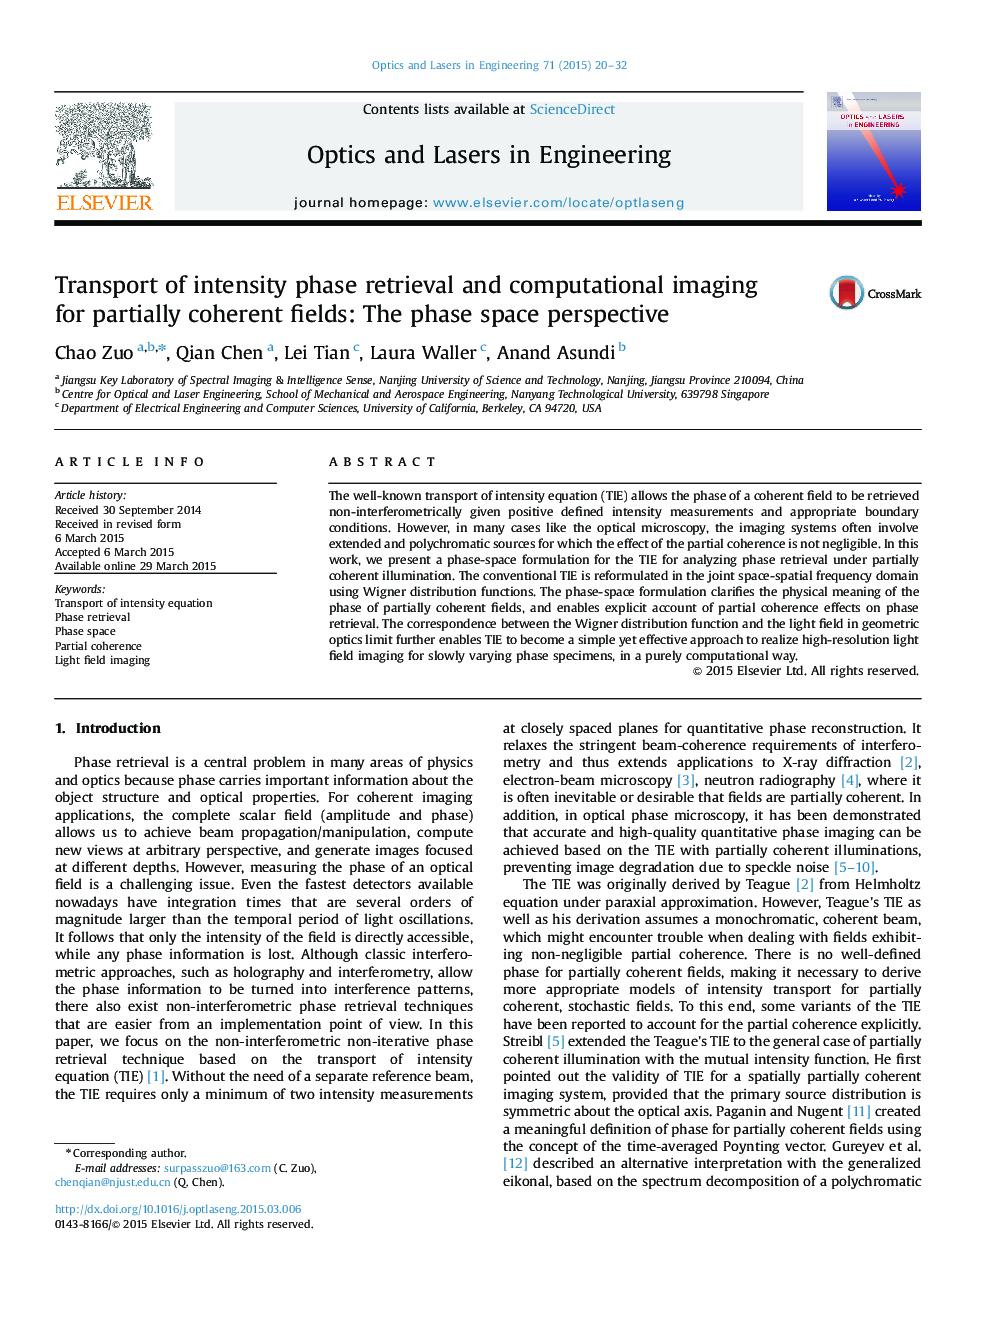 Transport of intensity phase retrieval and computational imaging for partially coherent fields: The phase space perspective